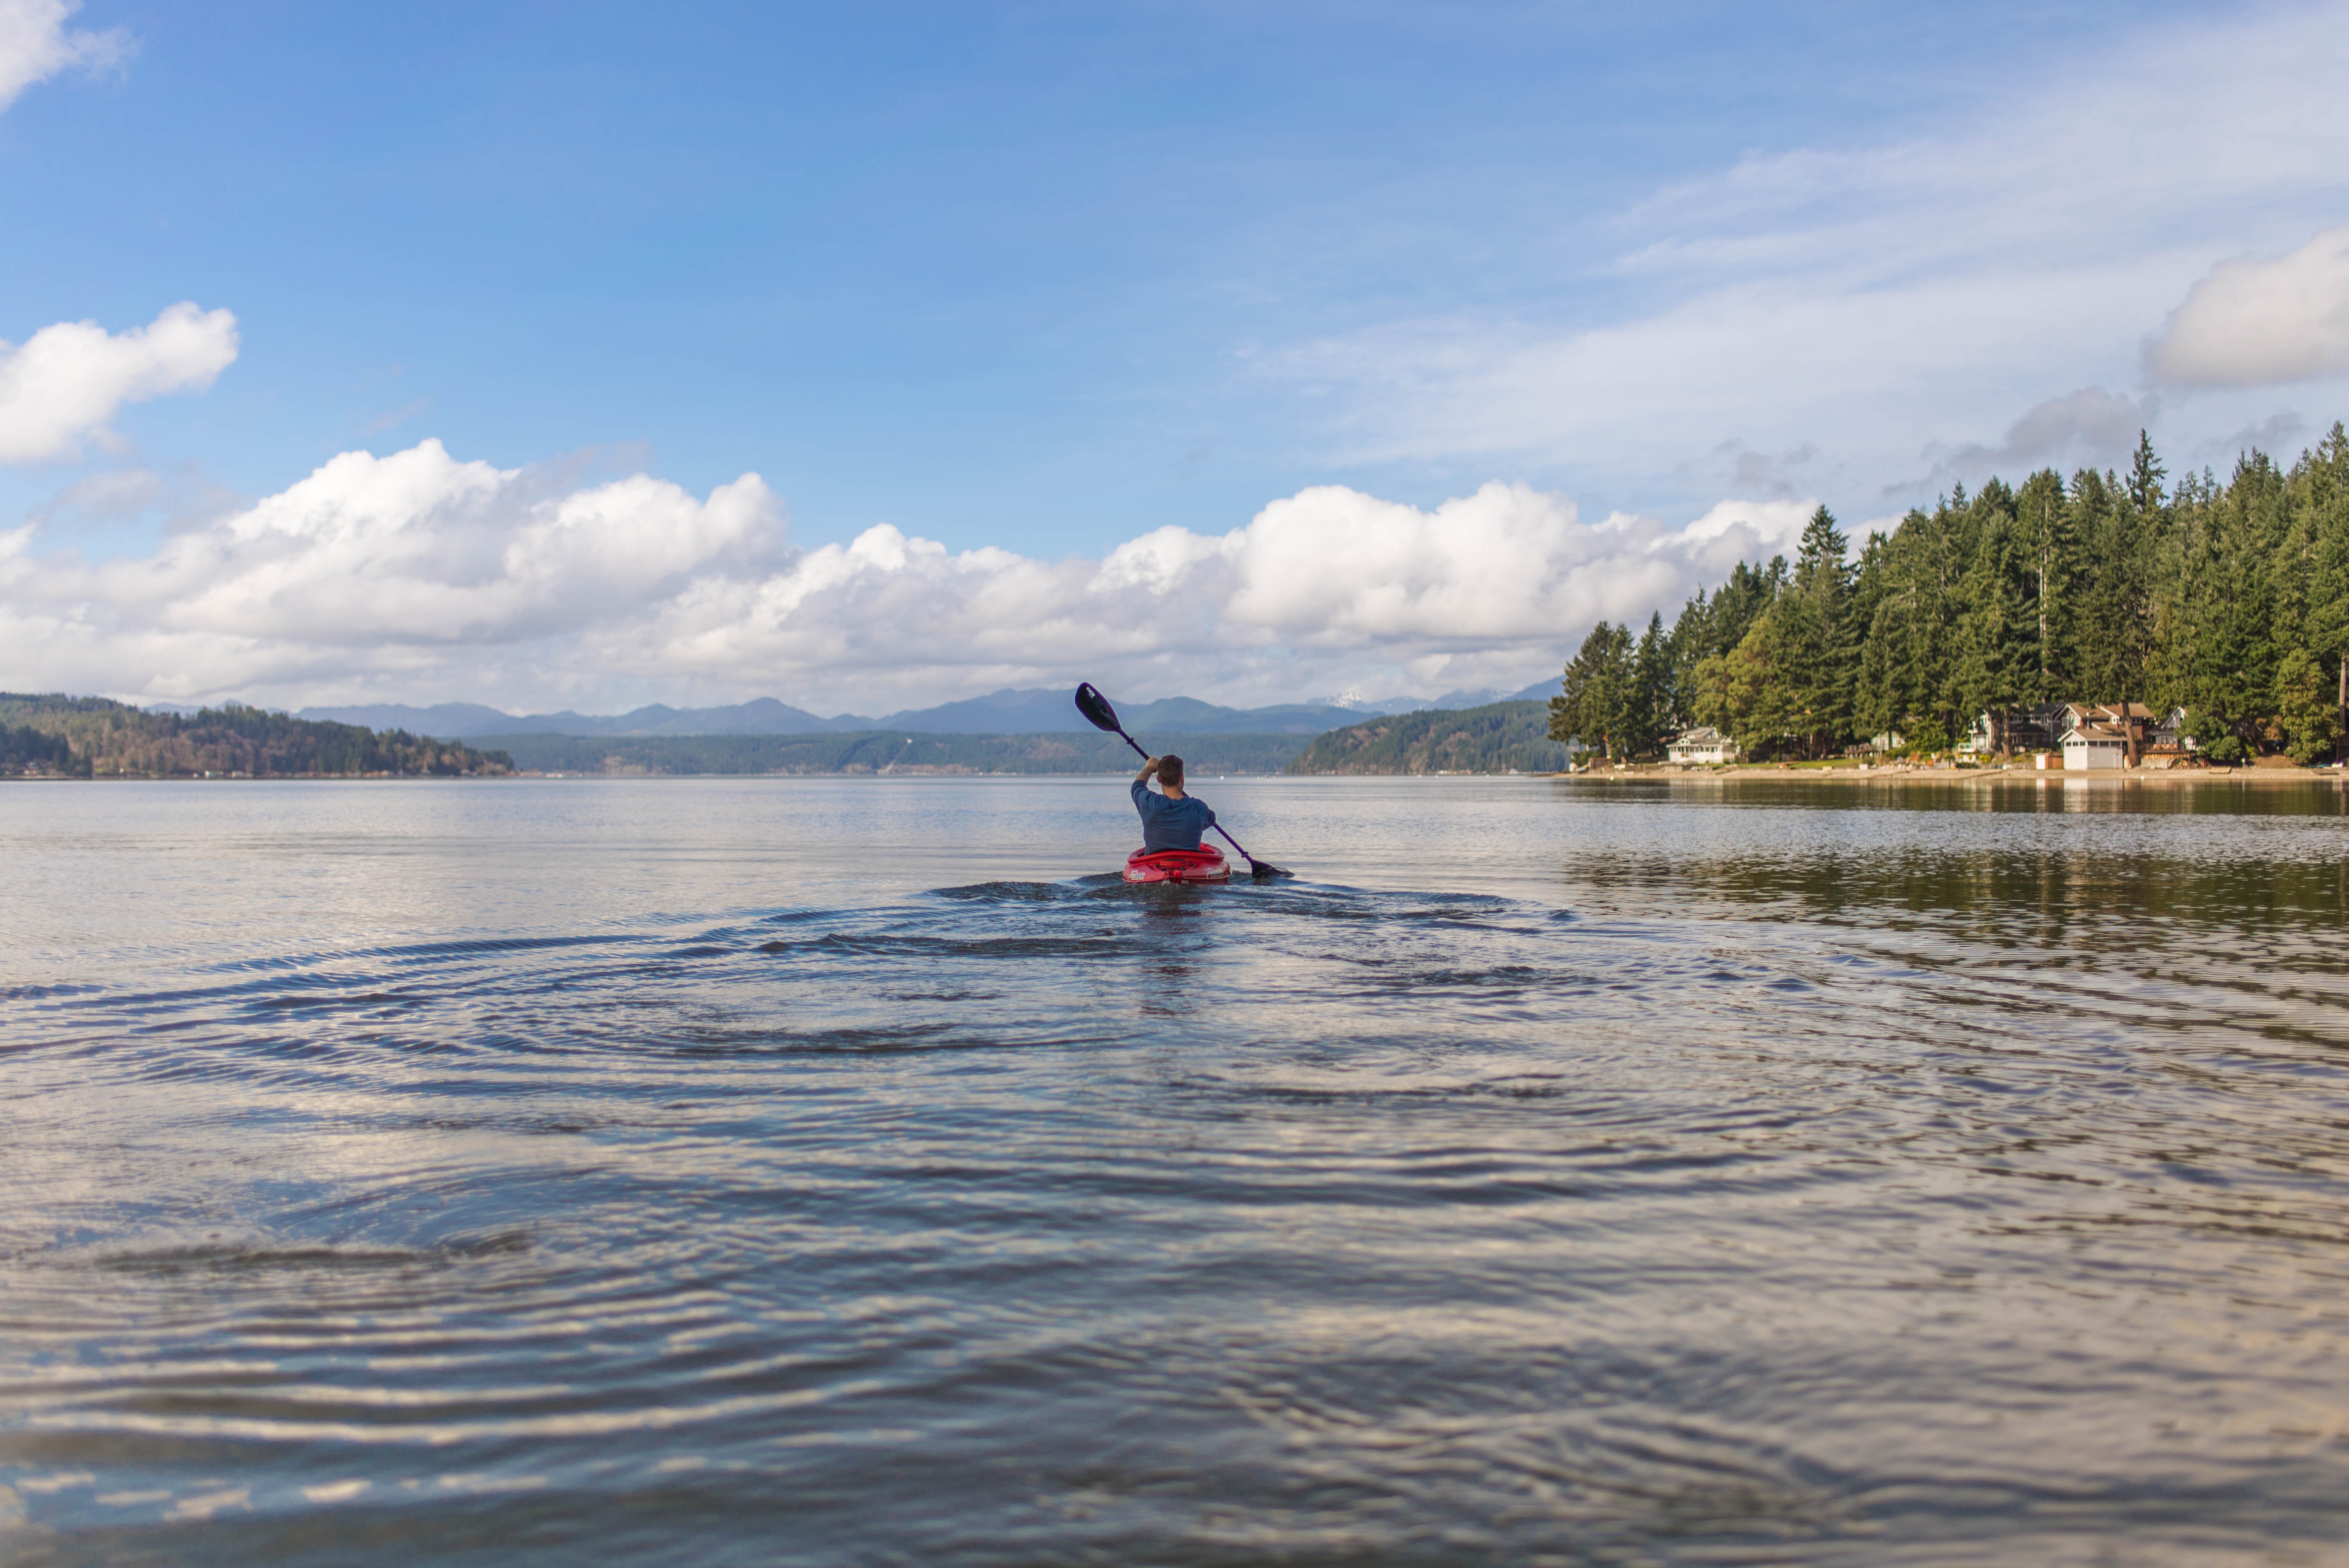 kayaking on open water as a hobby to relieve stress